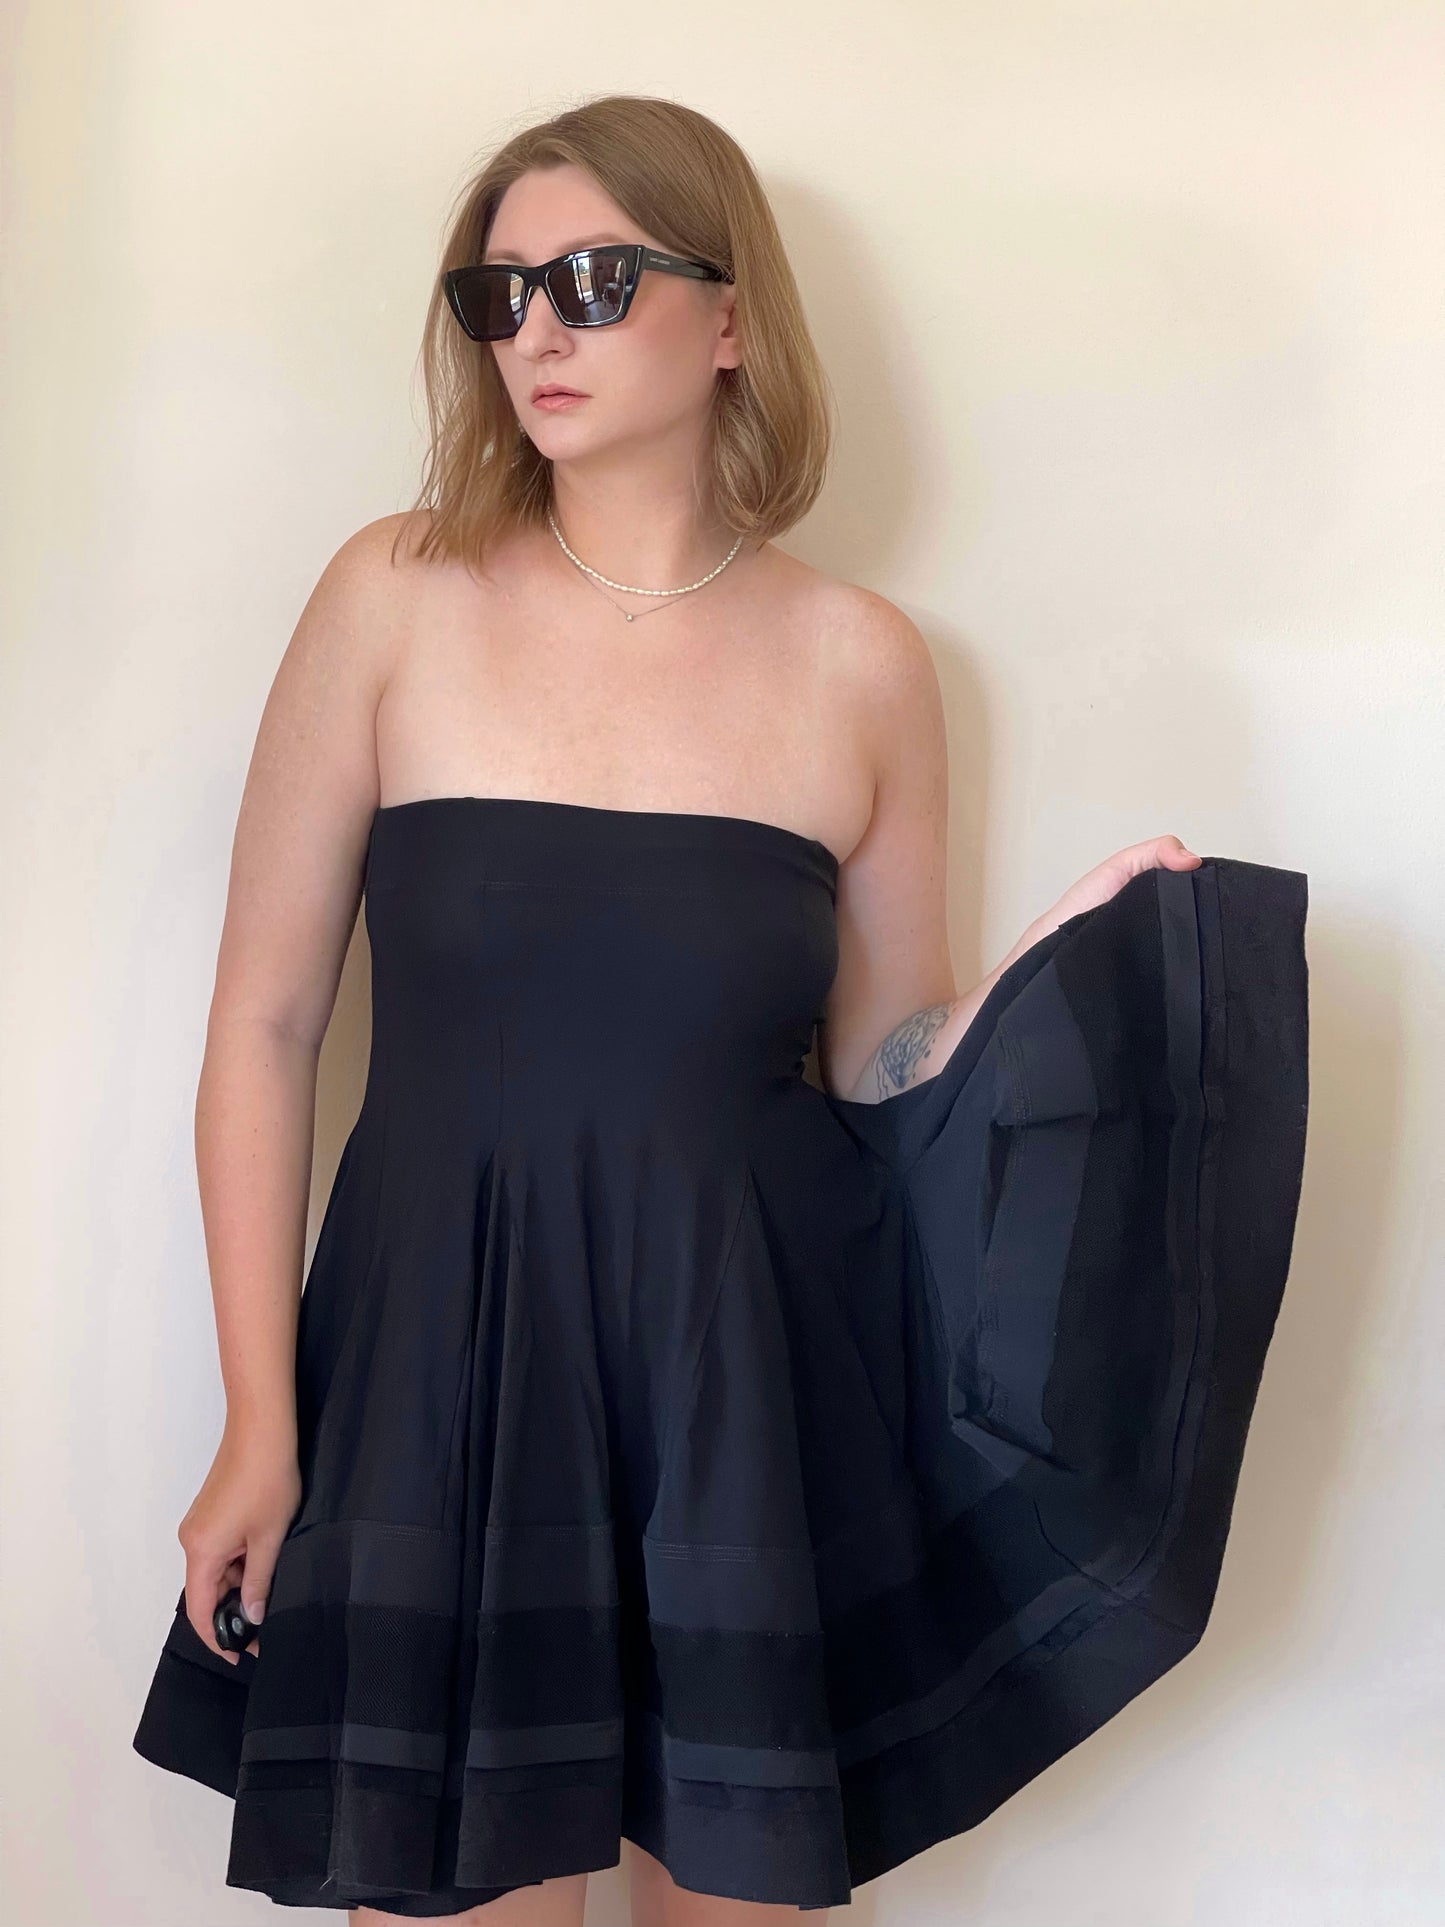 Vintage skirt/dress from avant-garde style French brand Marithé and François Girbaud